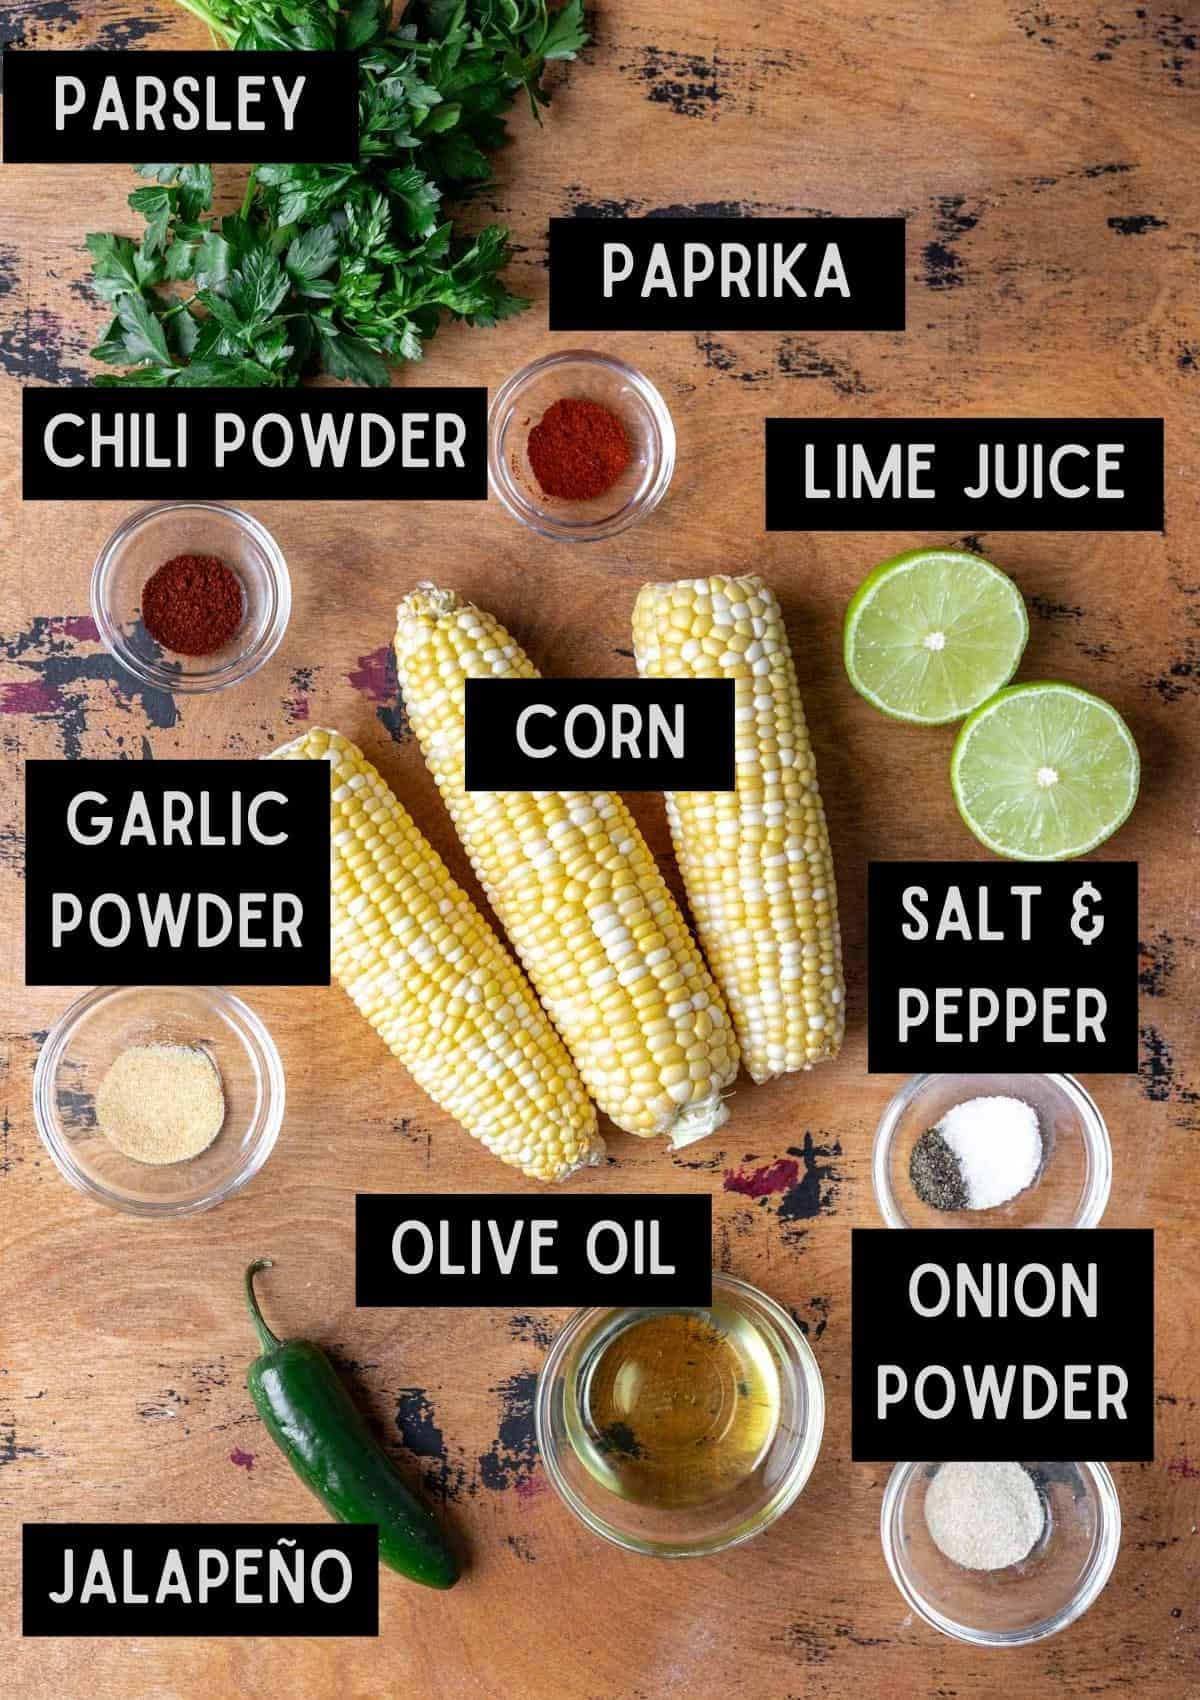 Labelled ingredients for skillet roasted corn (see recipe for details).